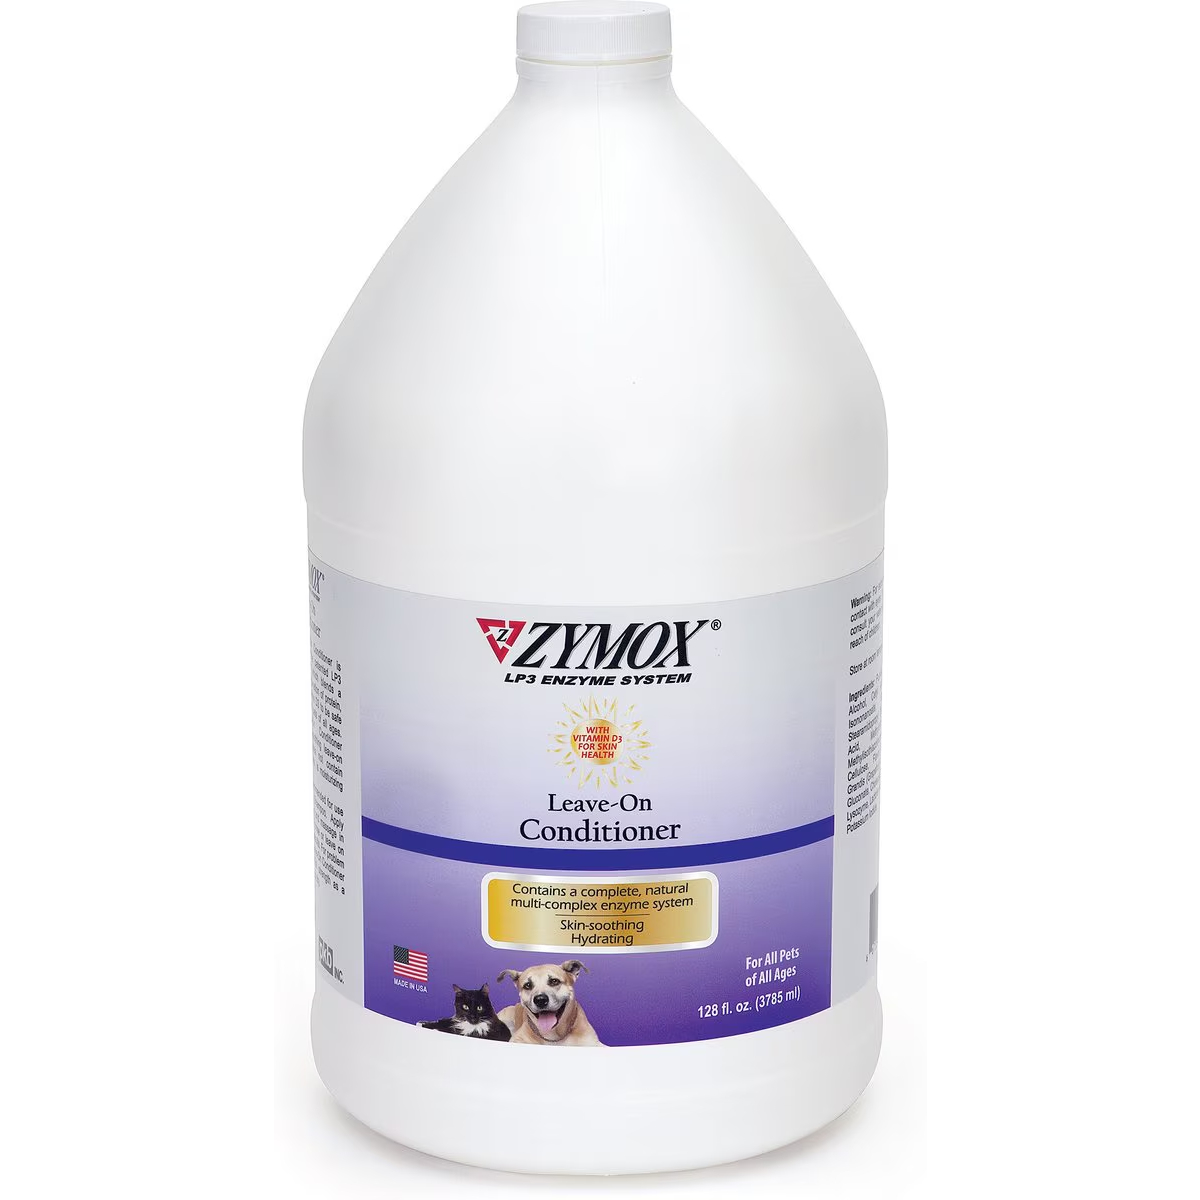 Zymox Enzymatic Dogs & Cat Leave-on Conditioner